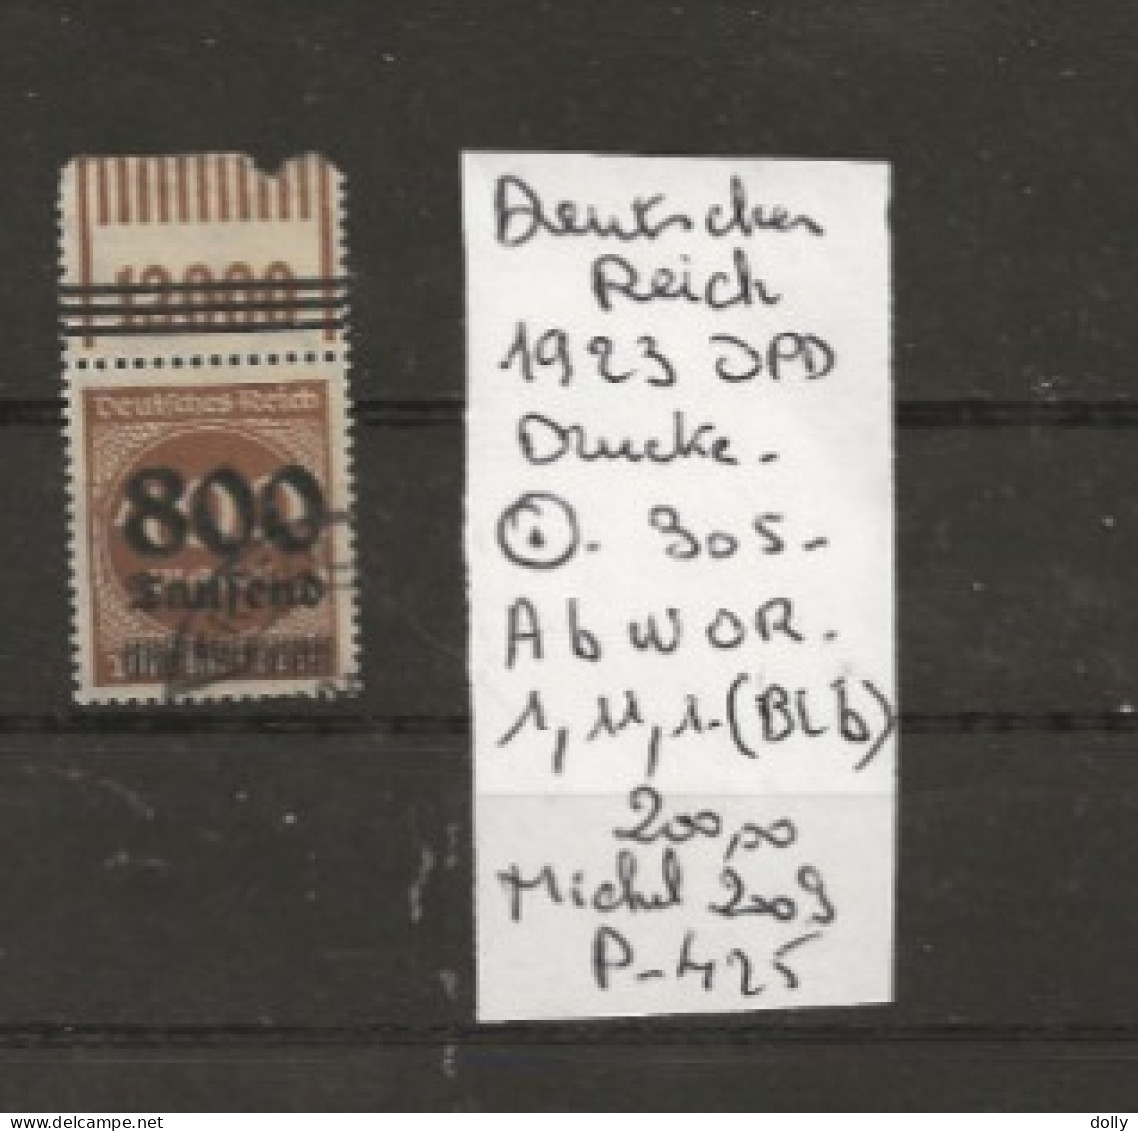 TIMBRE D ALLEMAGNE DEUTSCHES REICH 1923 Nr 305 OBLITERE OPD  A B W OR 1,11,1 COTE 200.00 € - 1922-1923 Lokale Uitgaves